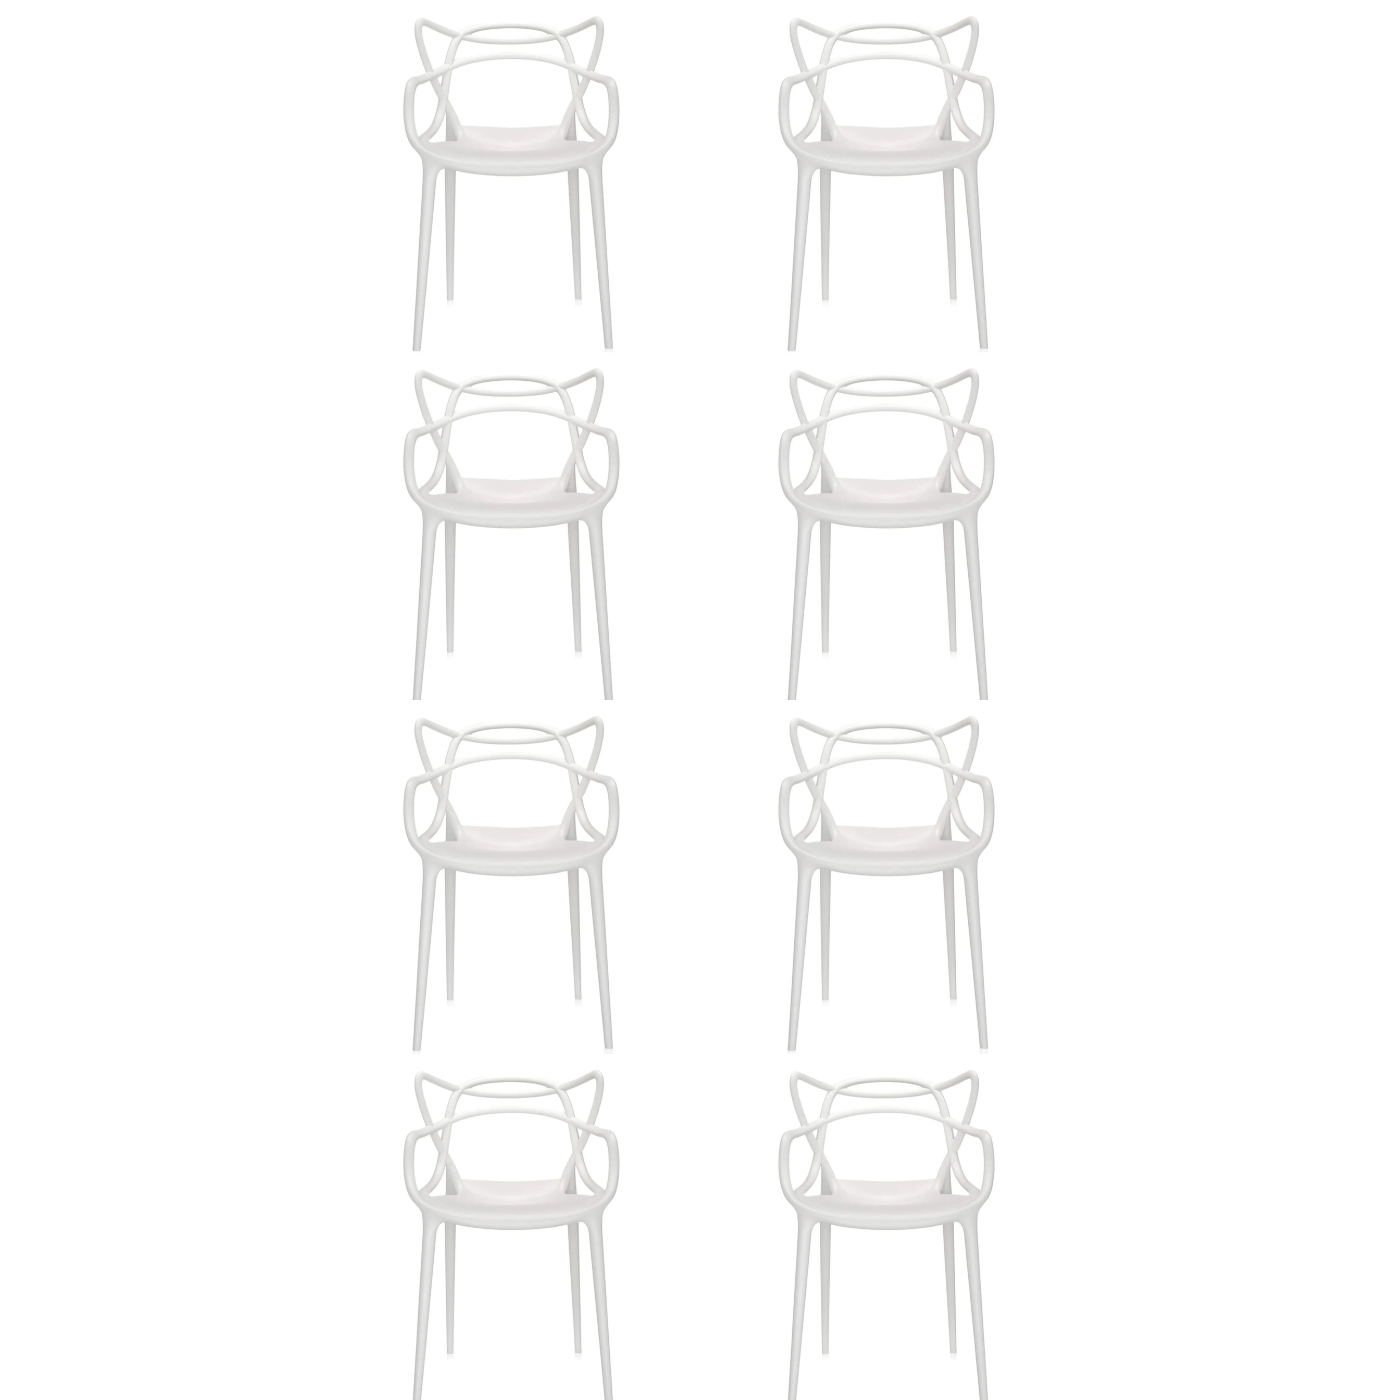 Kartell Masters Dining Chair Bundle Set Of 8 Chairs White Designer Furniture From Holloways Of Ludlow